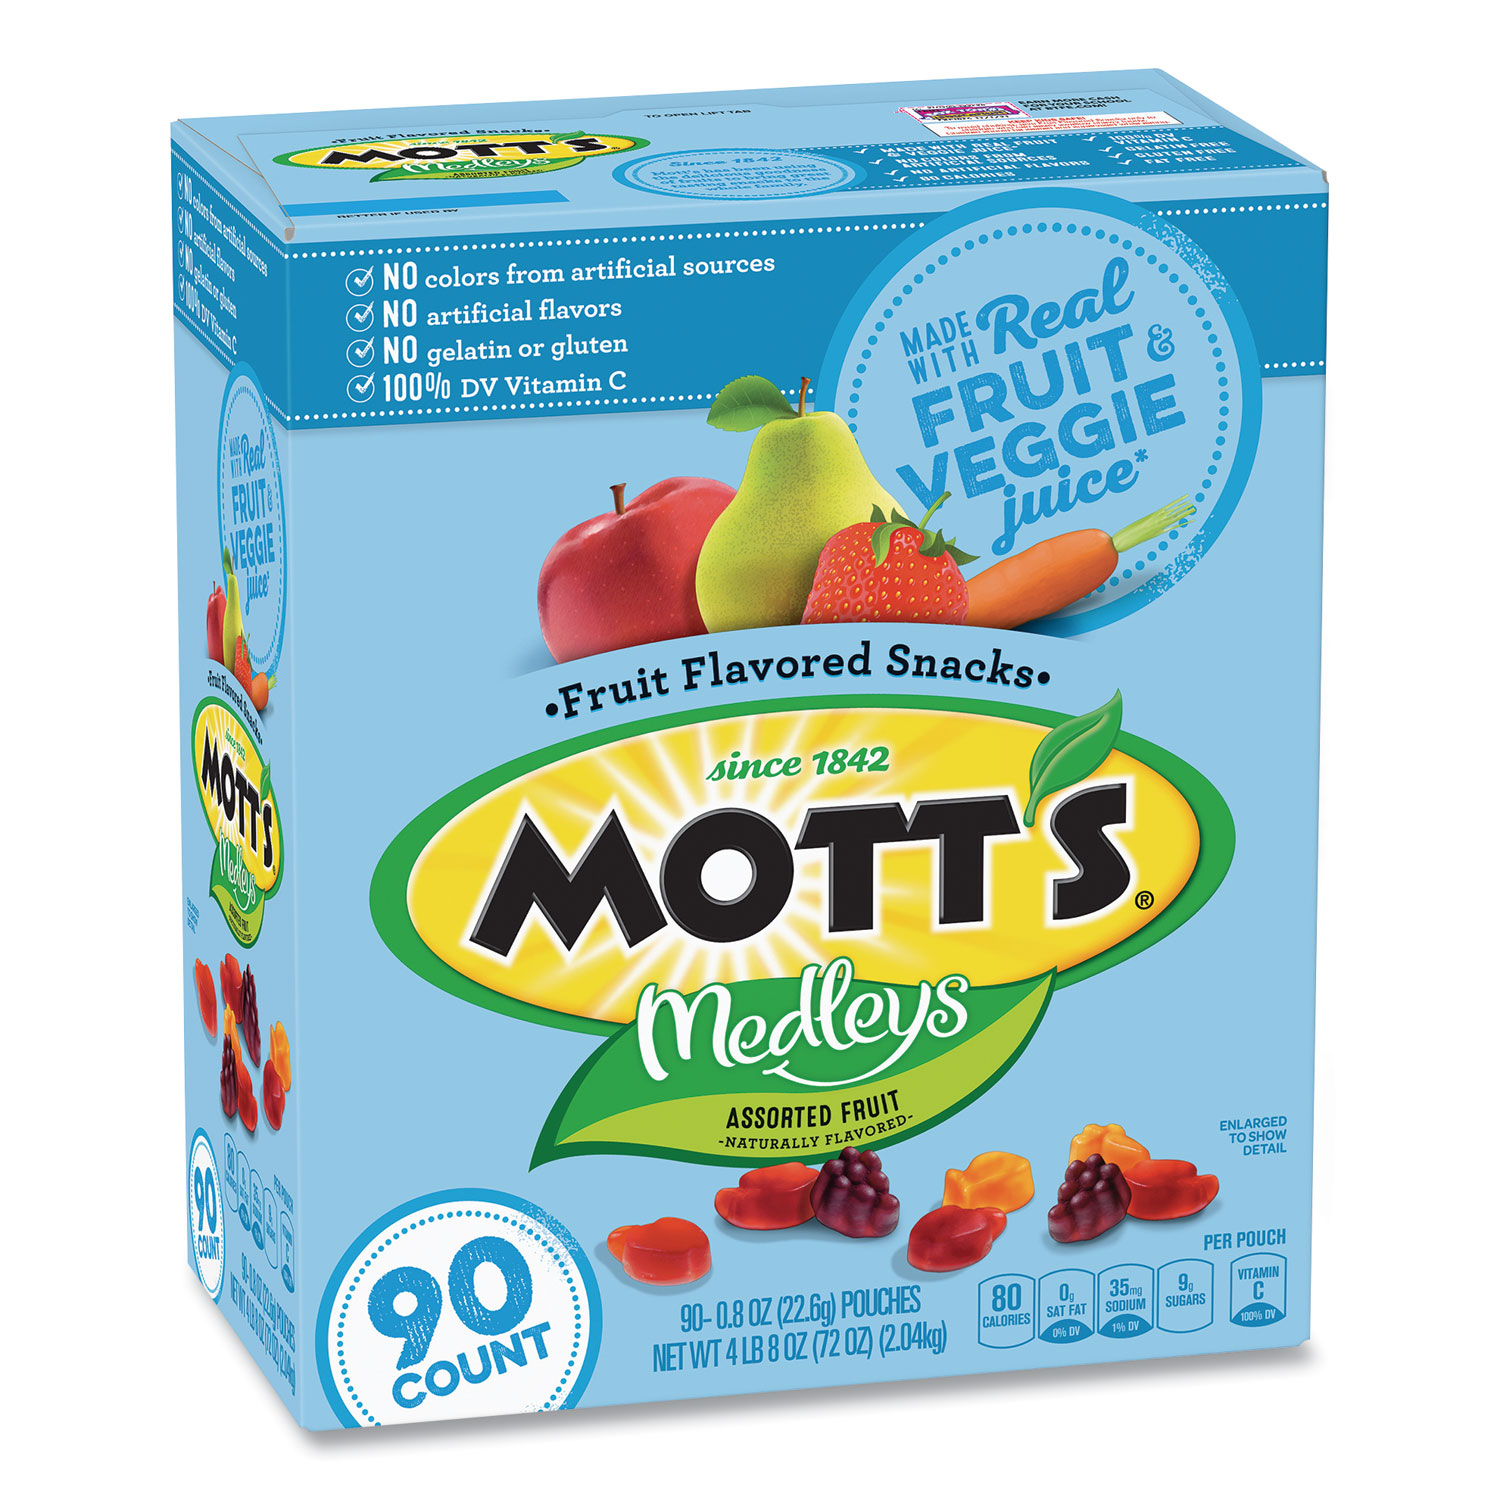 Motts® Medleys Fruit Snacks, 0.8 oz Pouch, 90 Pouches/Box, Free Delivery in 1-4 Business Days